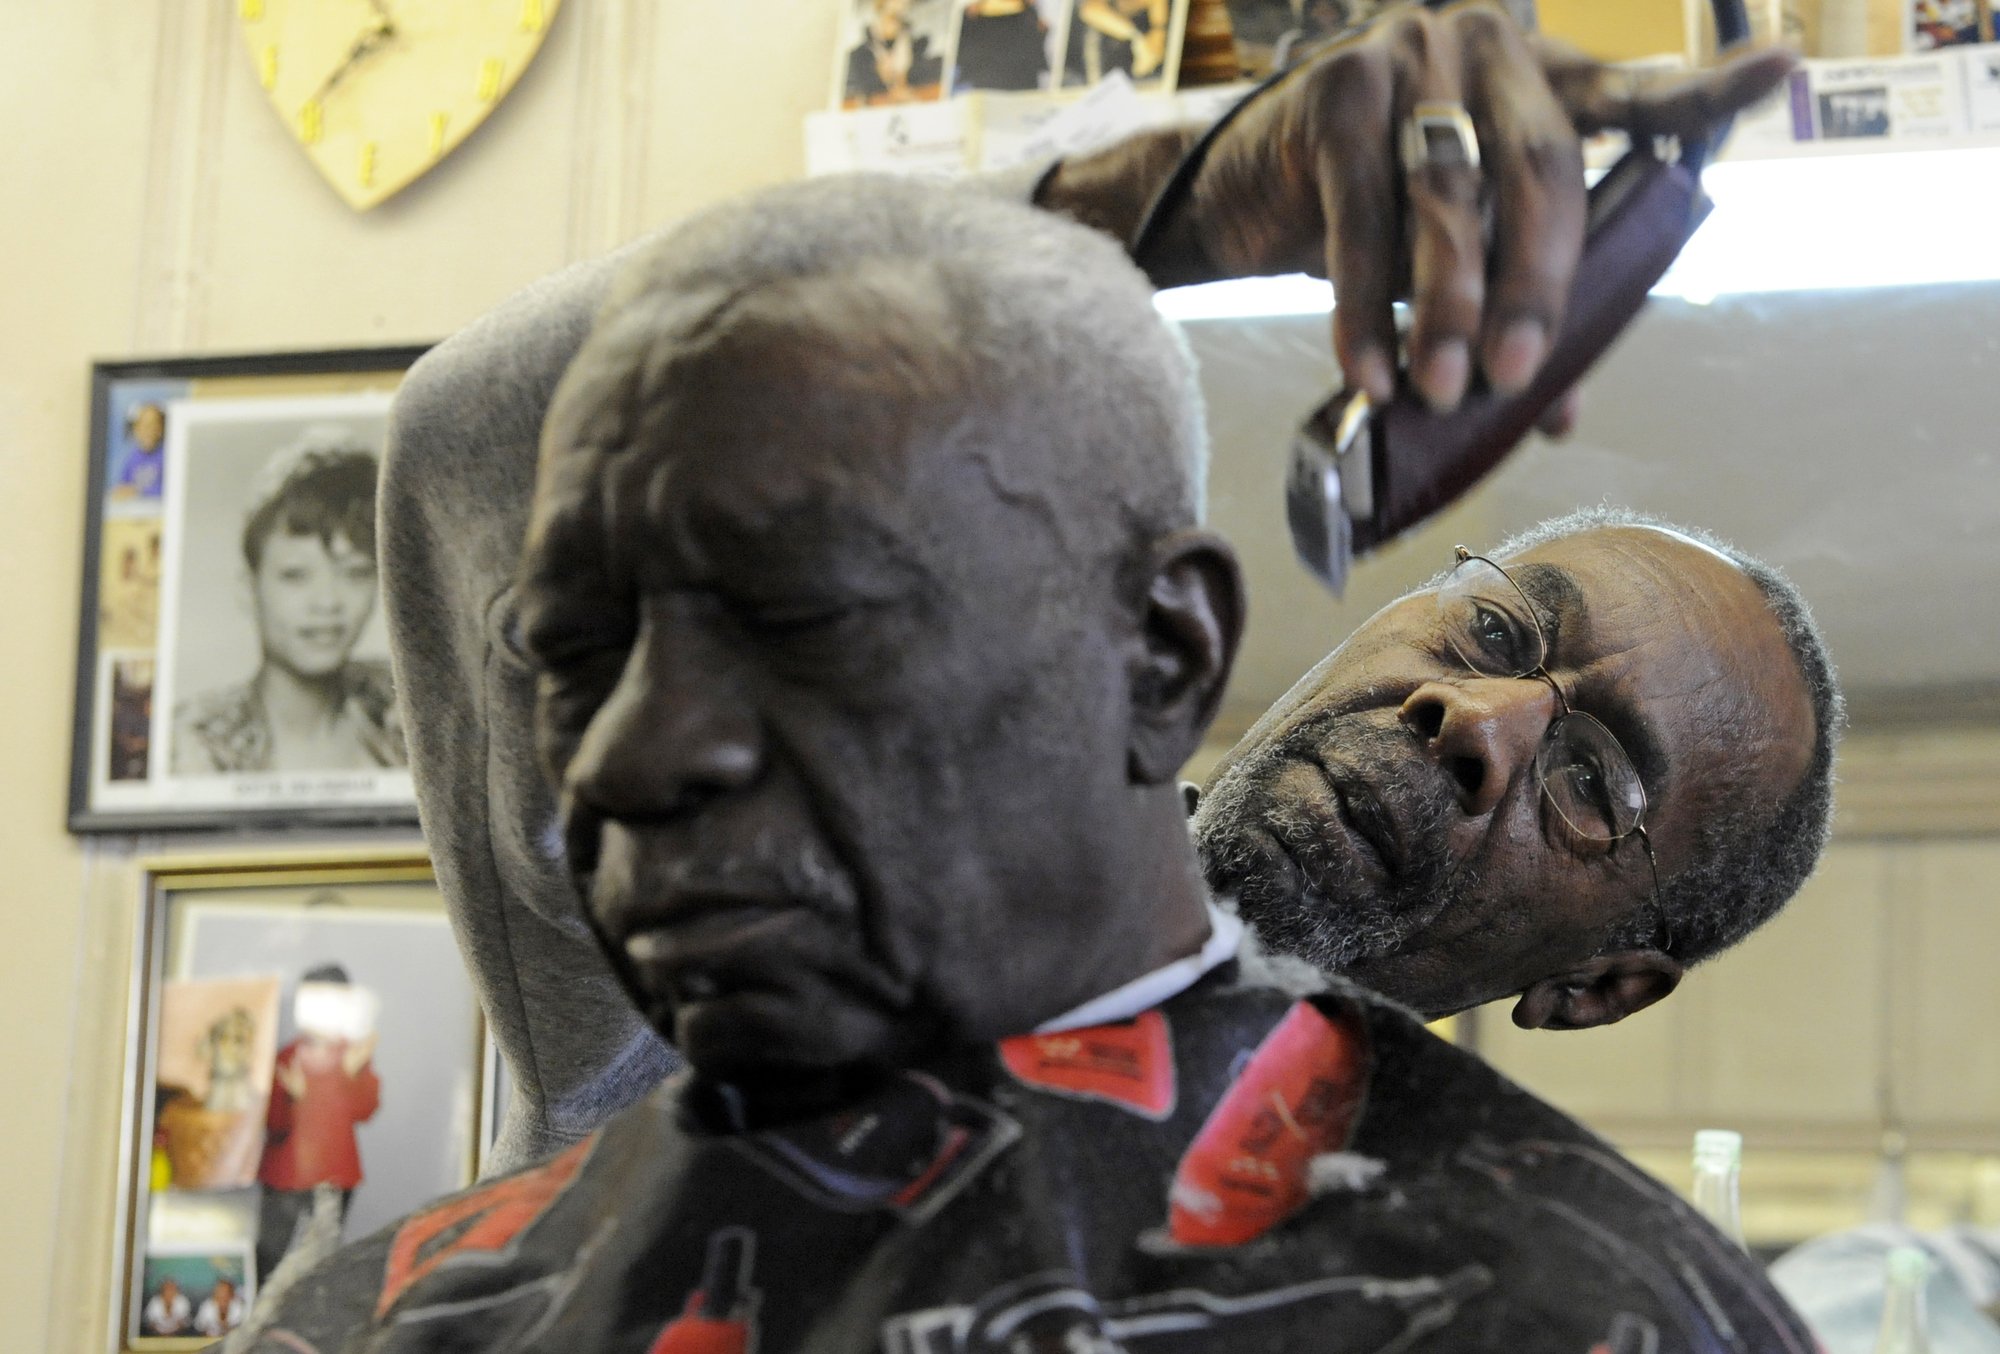 Vernon Winfrey cuts Henray Ray's hair at a Nashville barbershop that is owned by Vernon, in Nashville. | Source: Getty Images